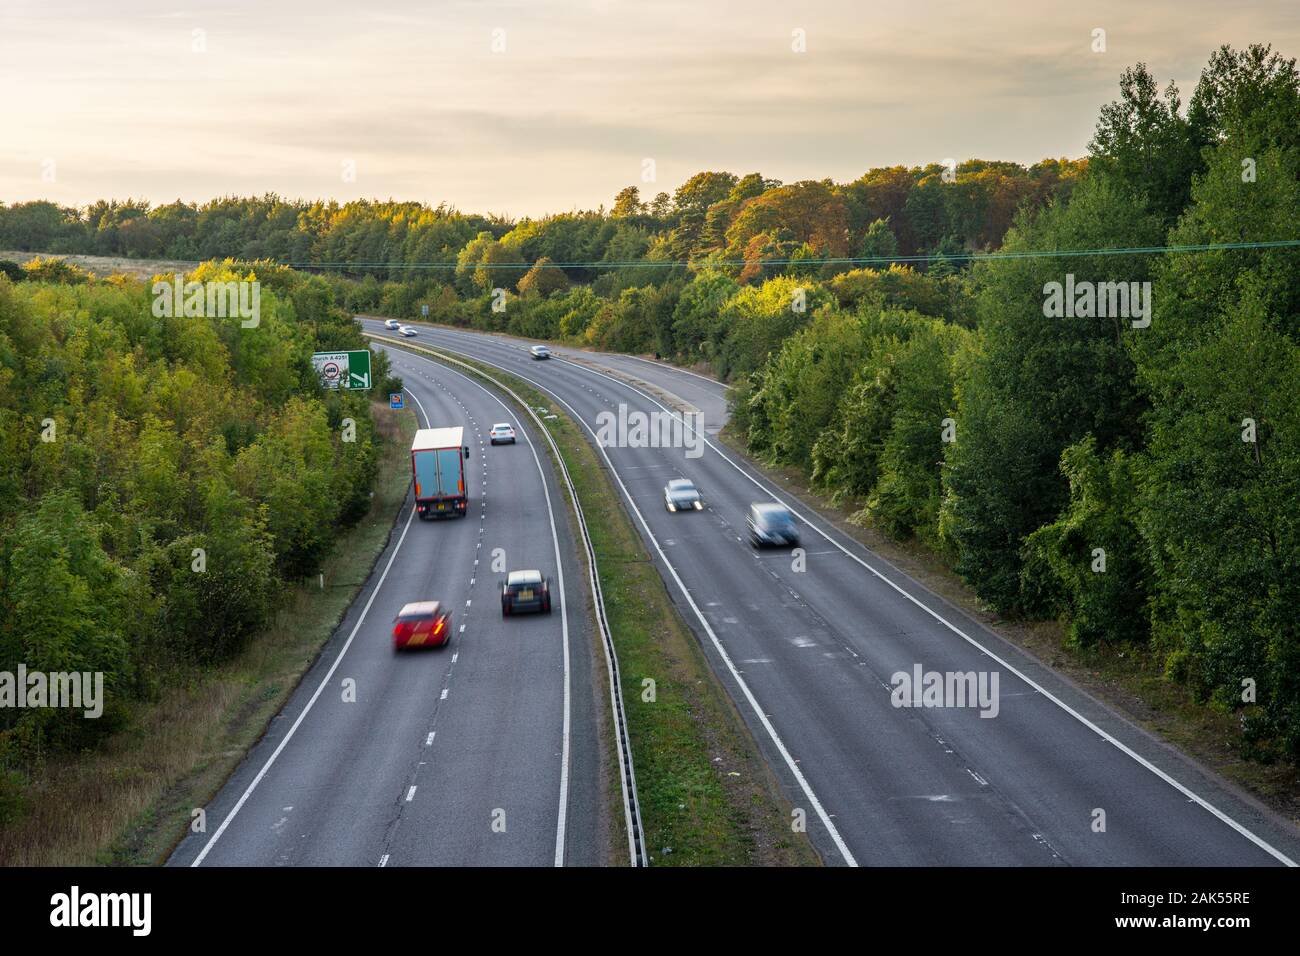 Tring, England, UK - September 14, 2019: Light traffic flows on the A41 dual carriageway near Tring in Hertfordshire in the London commuter belt. Stock Photo